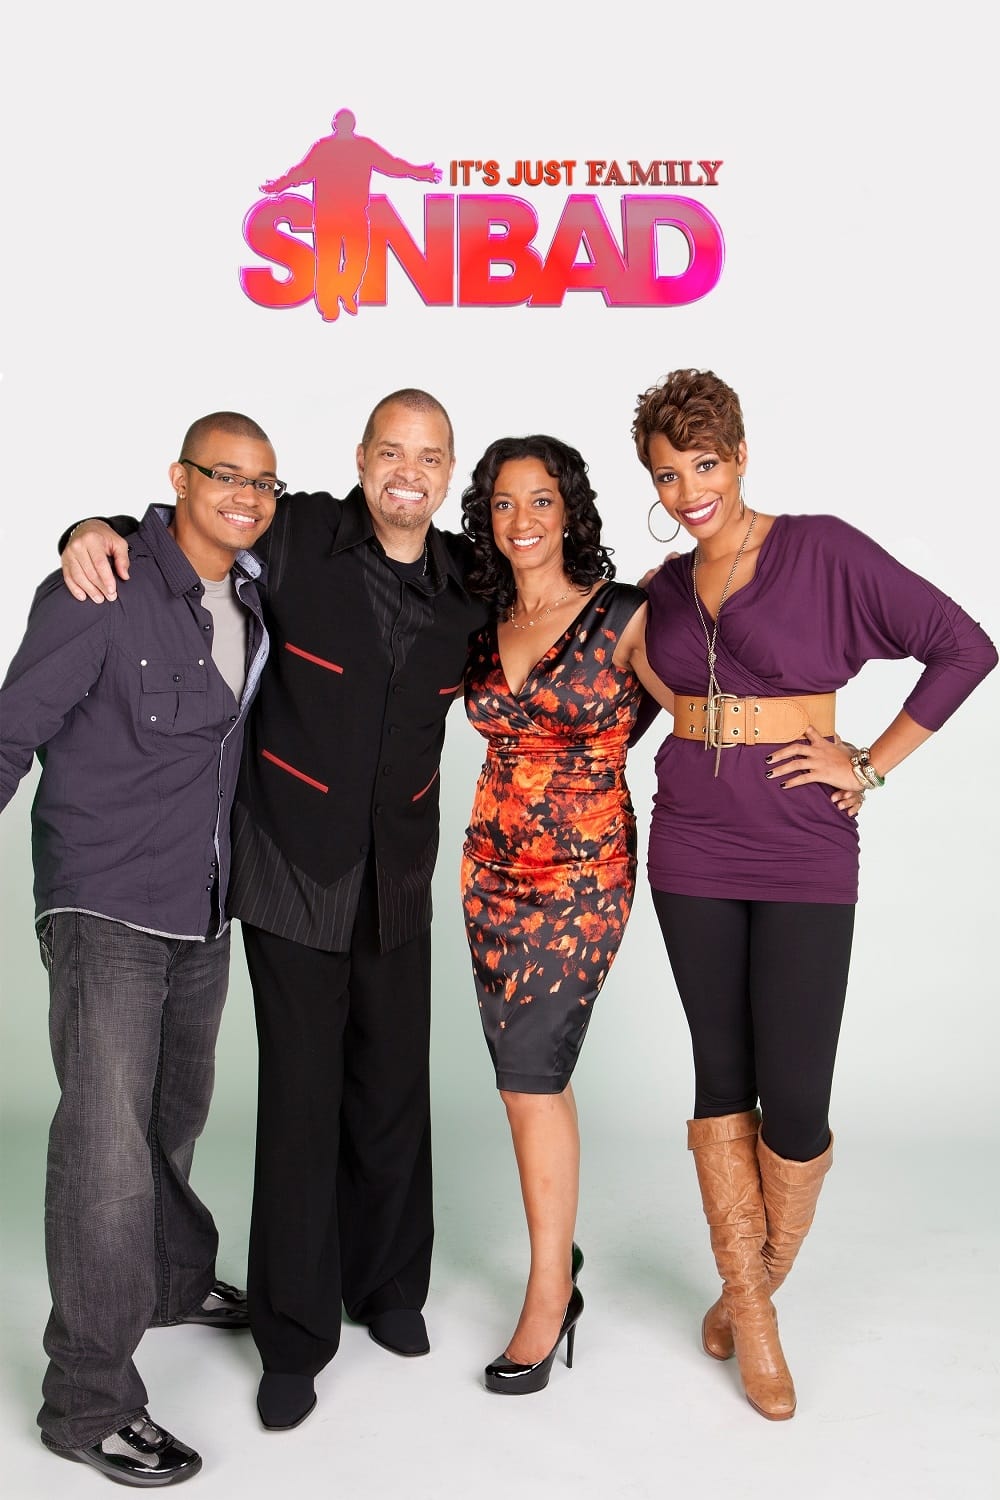 Sinbad It's Just Family on FREECABLE TV